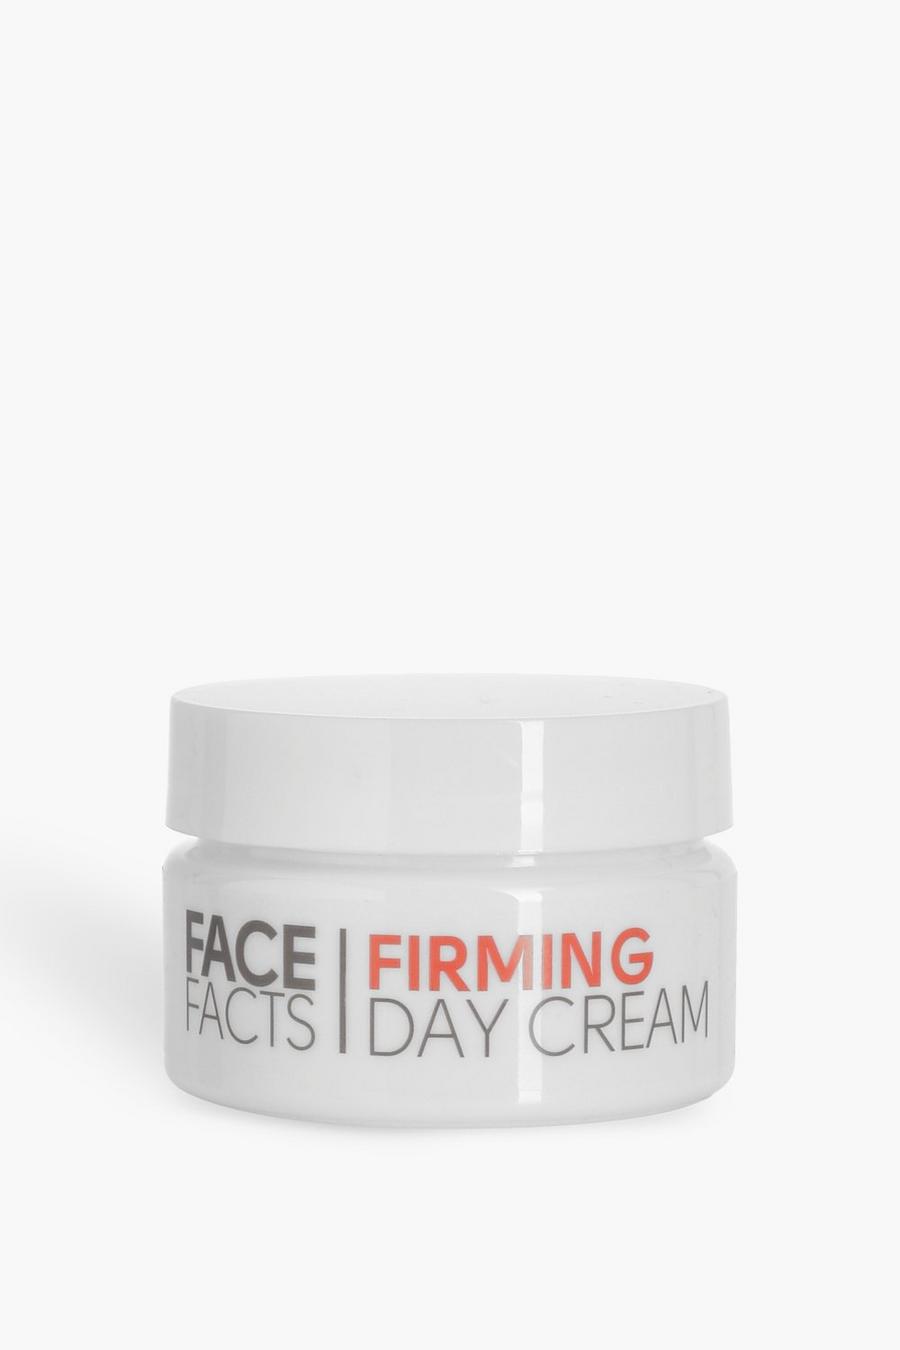 Face Facts Firmimg Day Cream image number 1